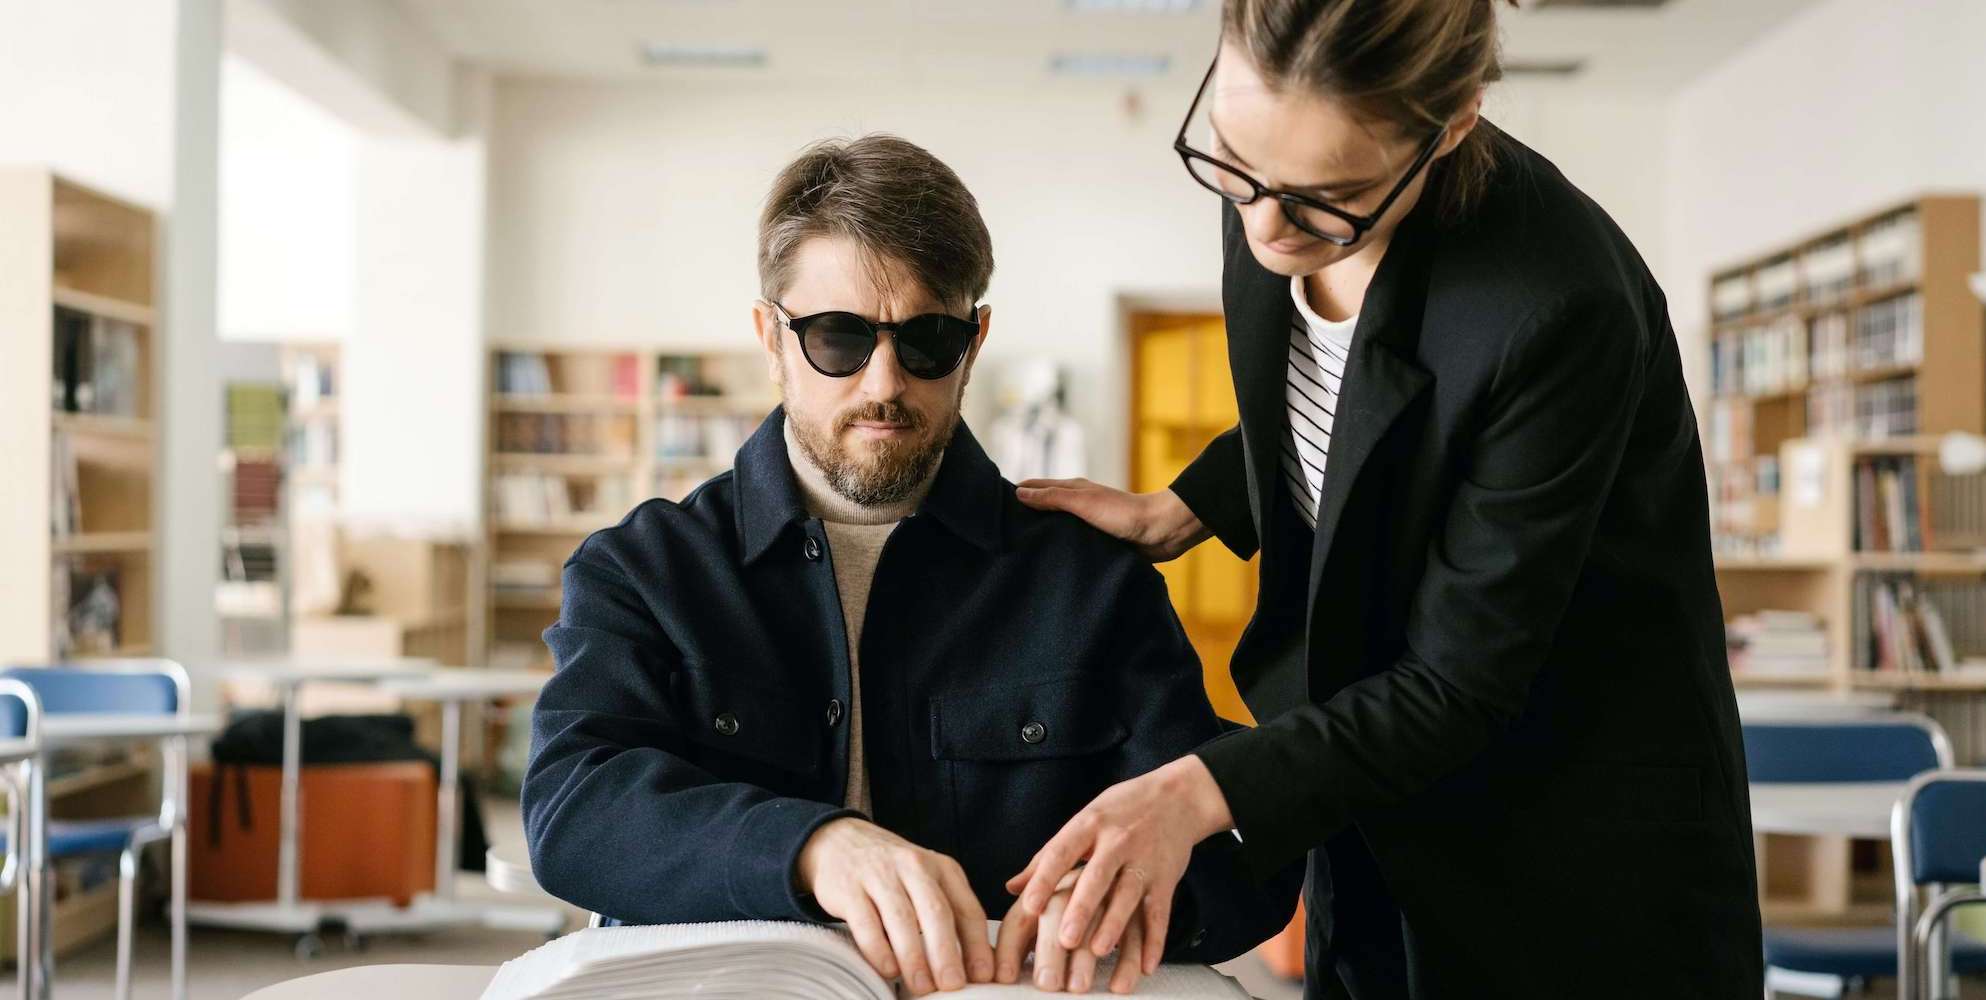 A lady helping a blind gentleman read a braille book in a library. Photo from Pexels (Photographer is Mikhail Nilov)